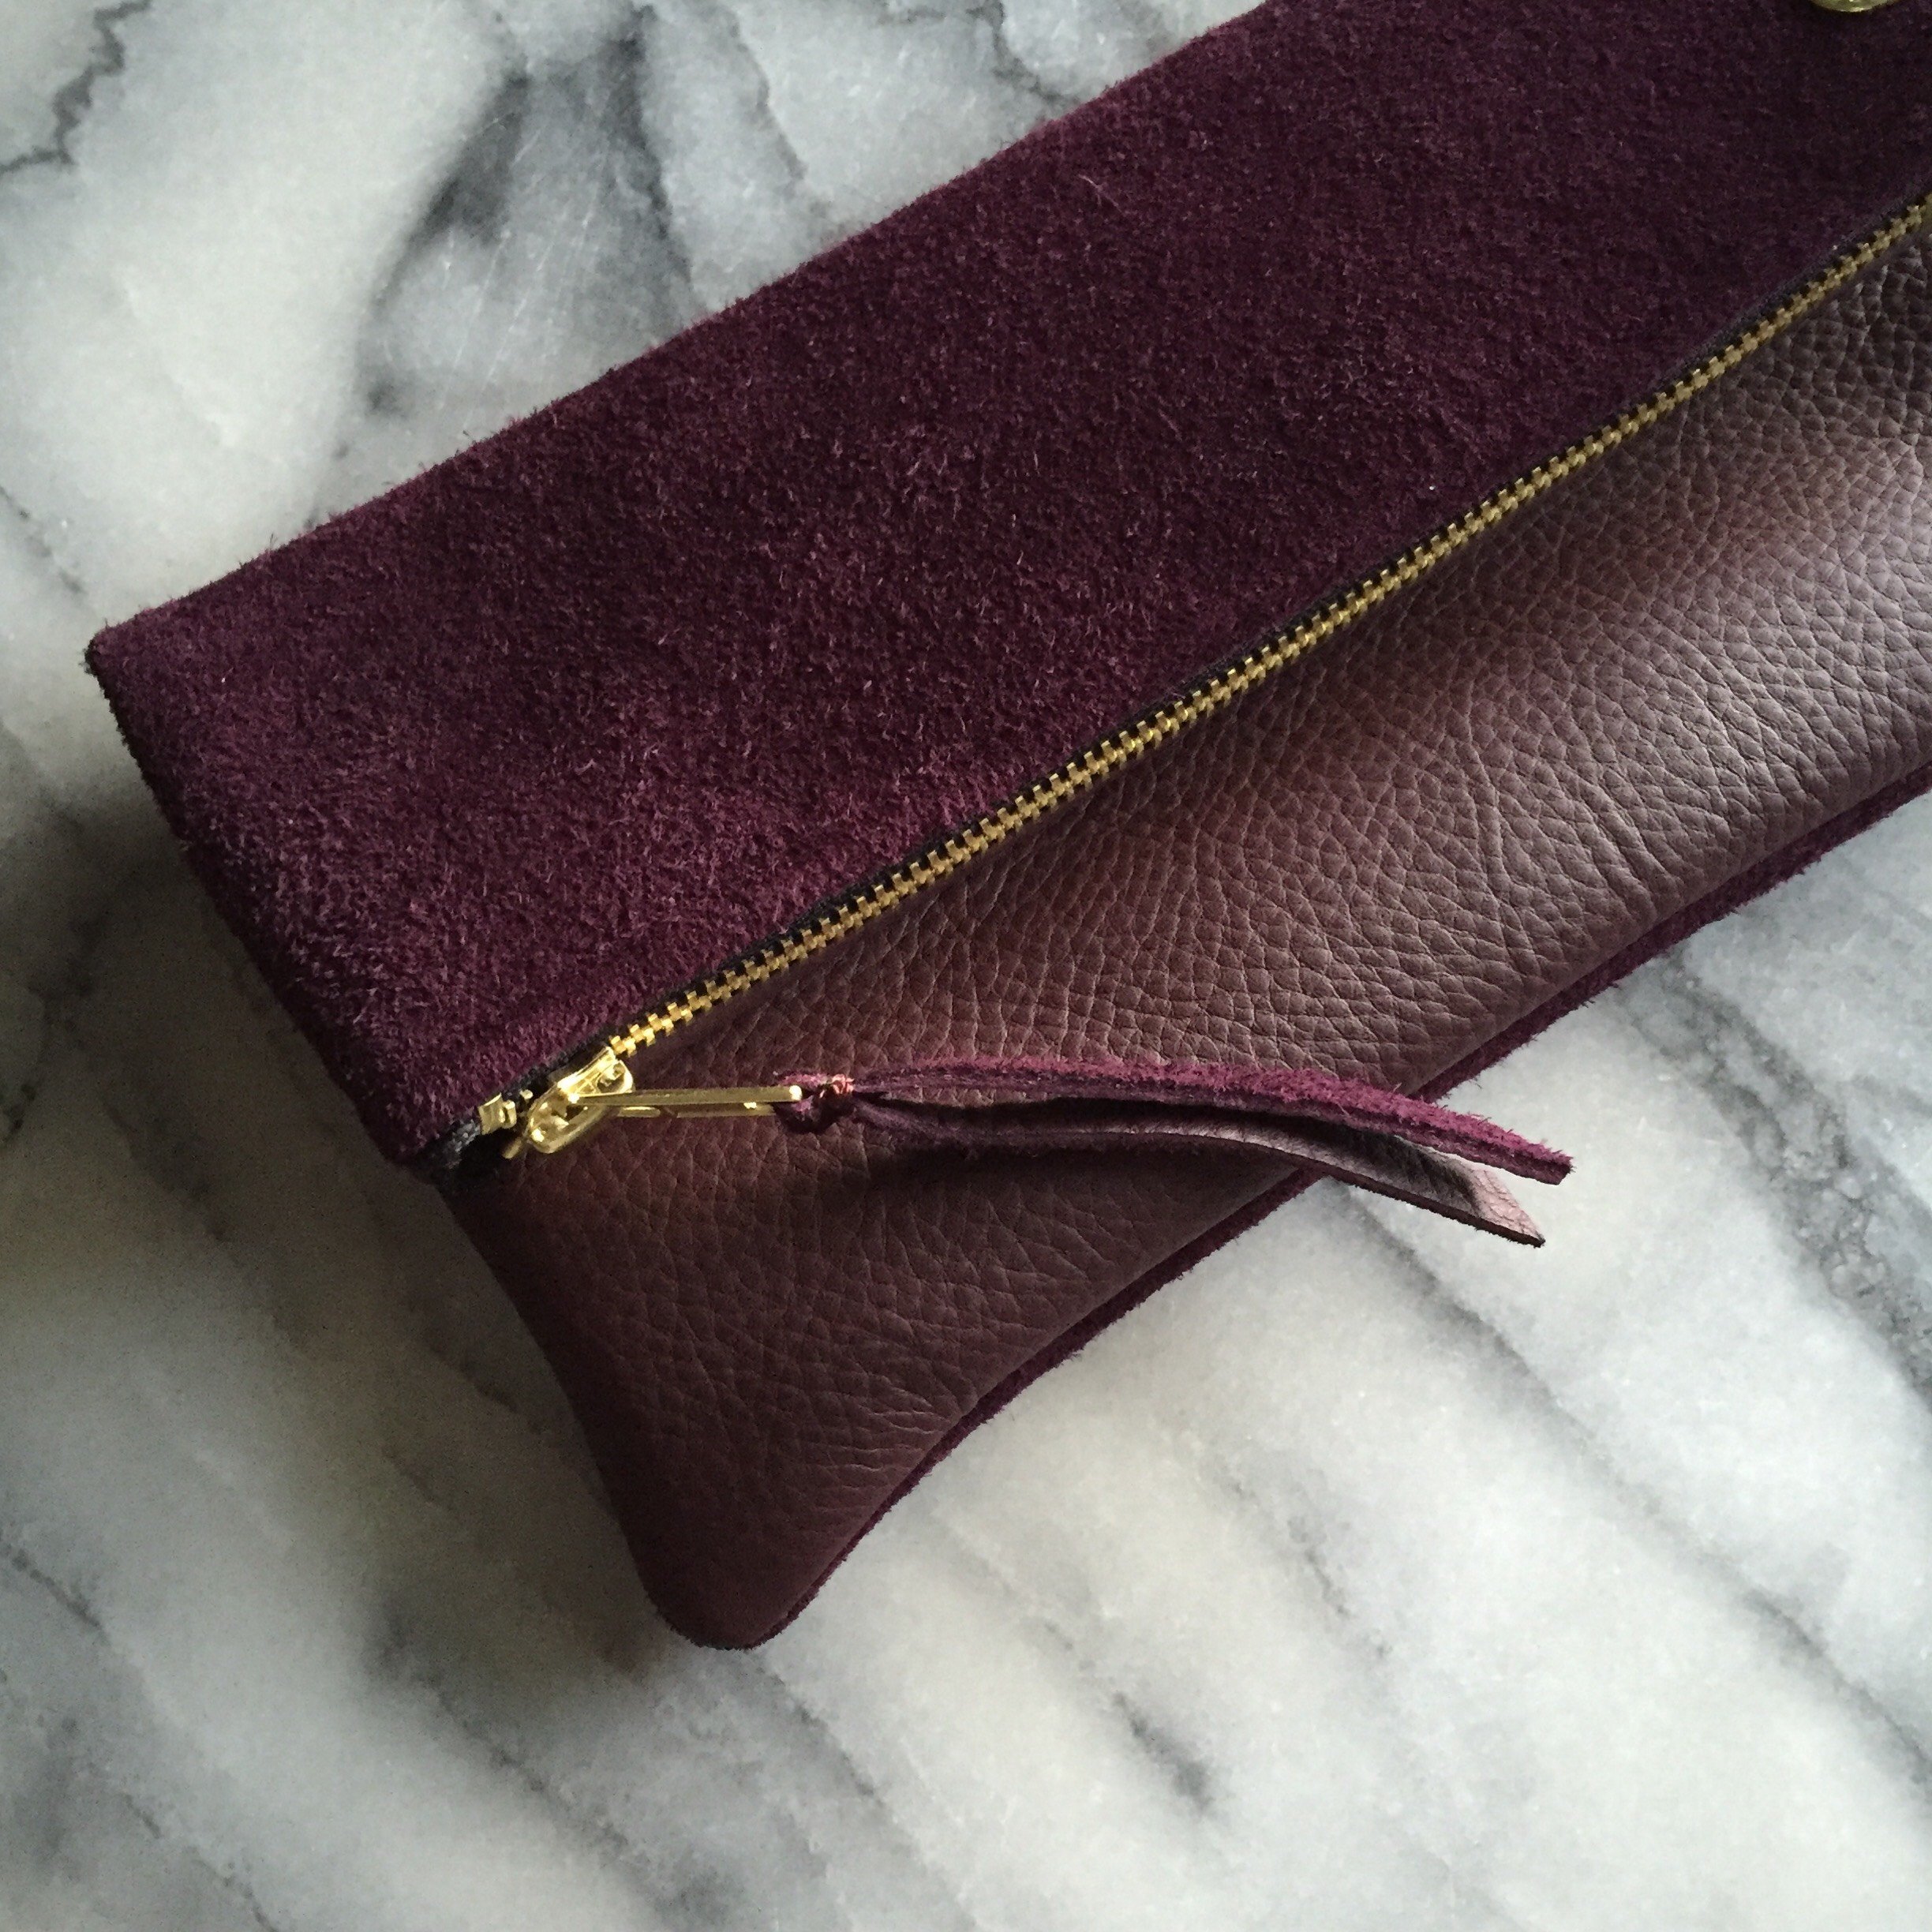 VIP Fold Over Bag - Plum Suede & Leather